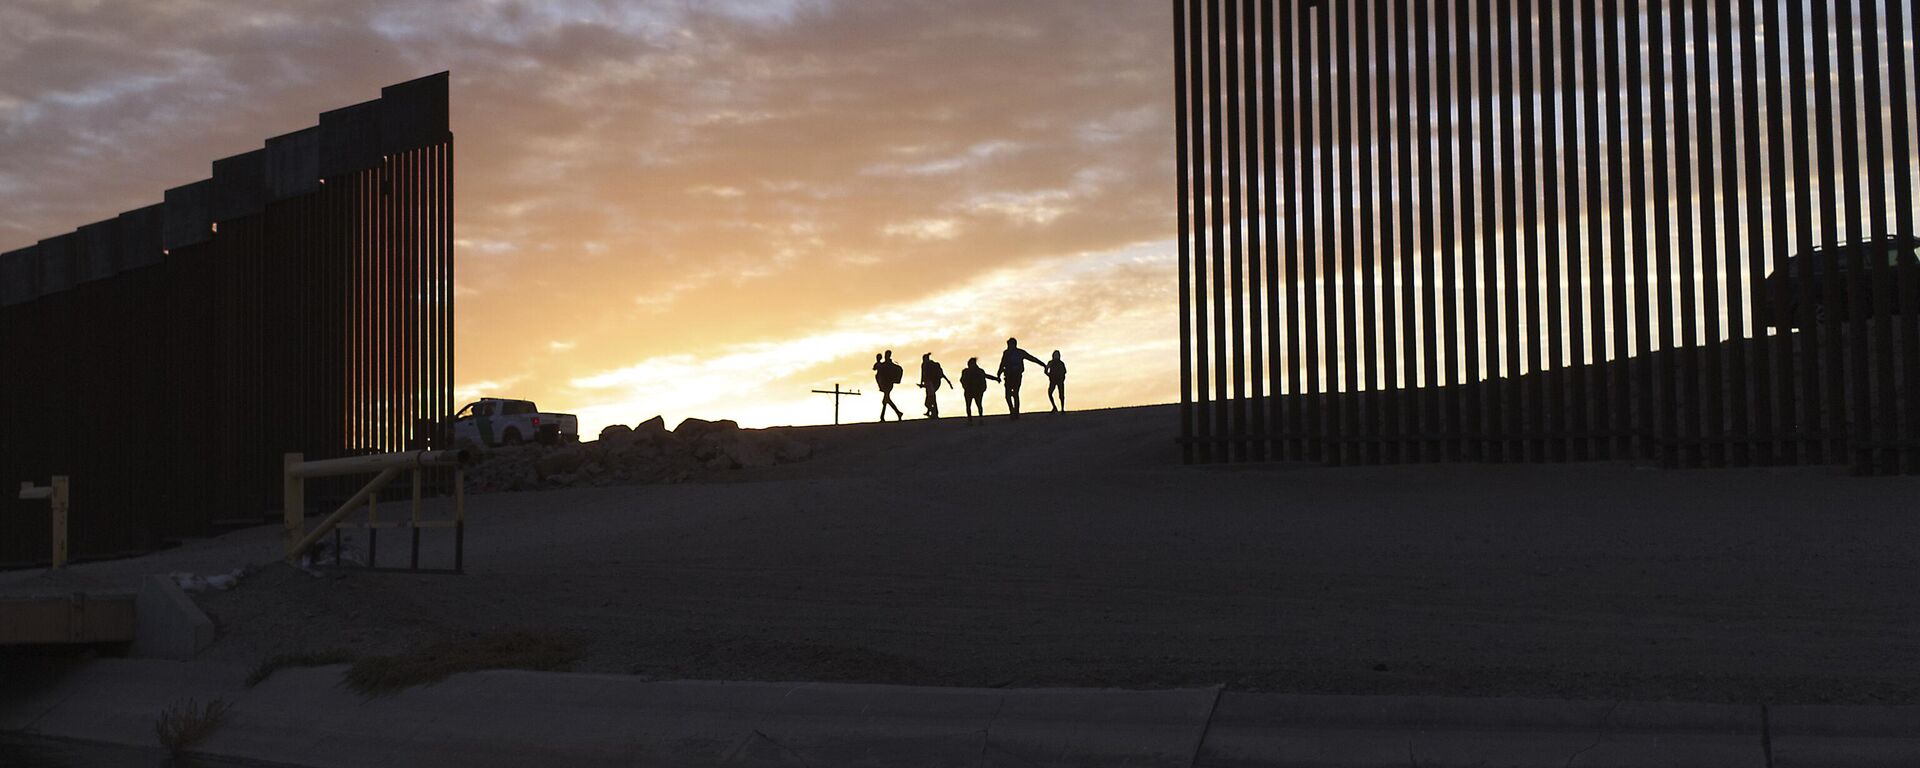  A pair of migrant families from Brazil seeking asylum, walk through a gap in the border wall to reach the United States after crossing from Mexico to Yuma, Ariz., June 10, 2021. - Sputnik International, 1920, 15.12.2023